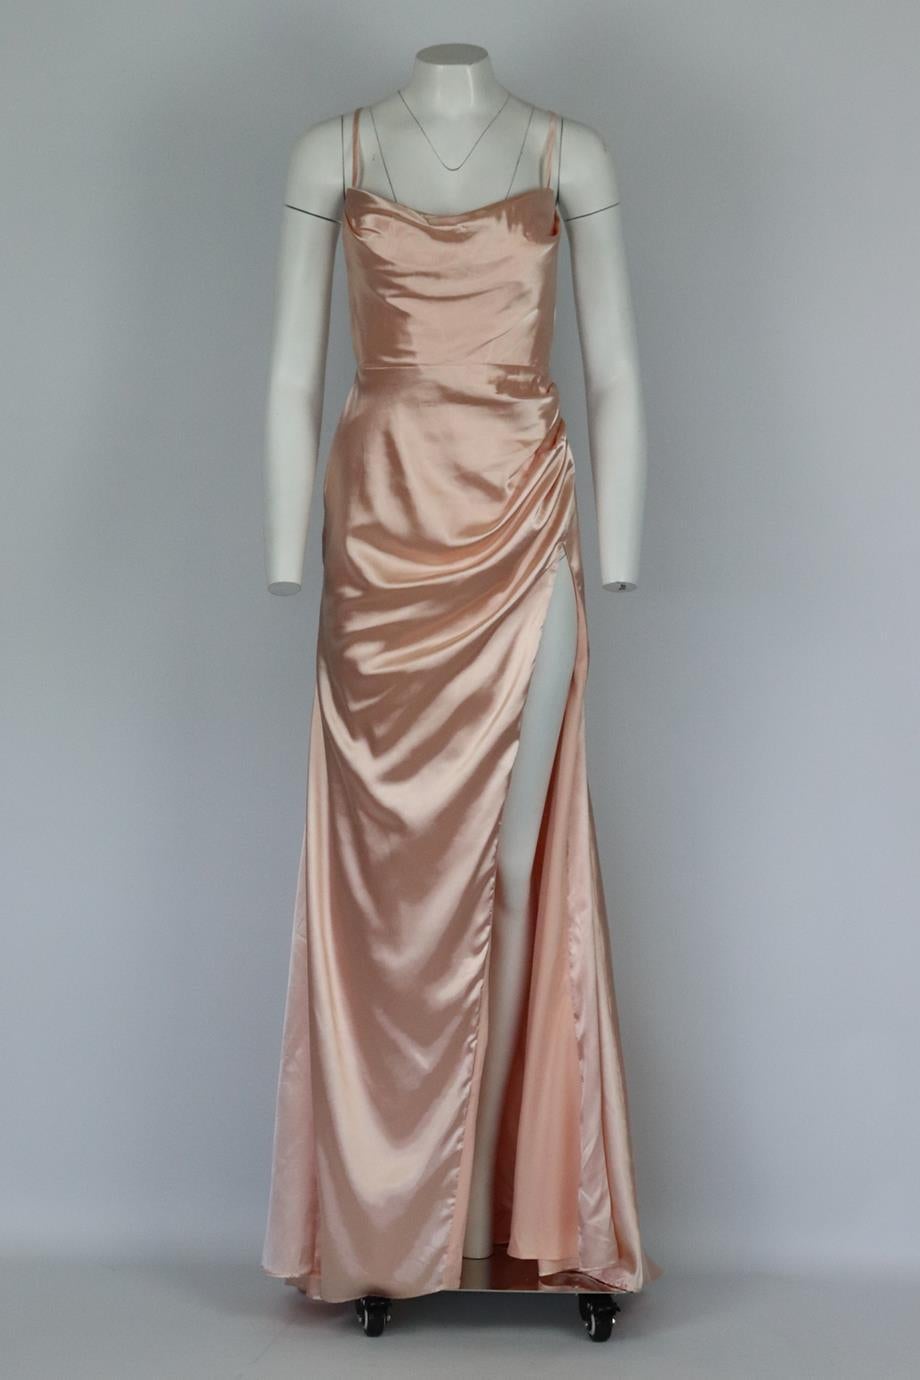 To The Nines open back draped satin gown. Pink. Sleeveless, cowl neck. Zip fastening at back. 100% Polyester. Size: UK 10 (US 6, FR 38, IT 42) Bust: 34 in. Waist: 28 in. Hips: 37 in. Length: 61 in. New with tags
